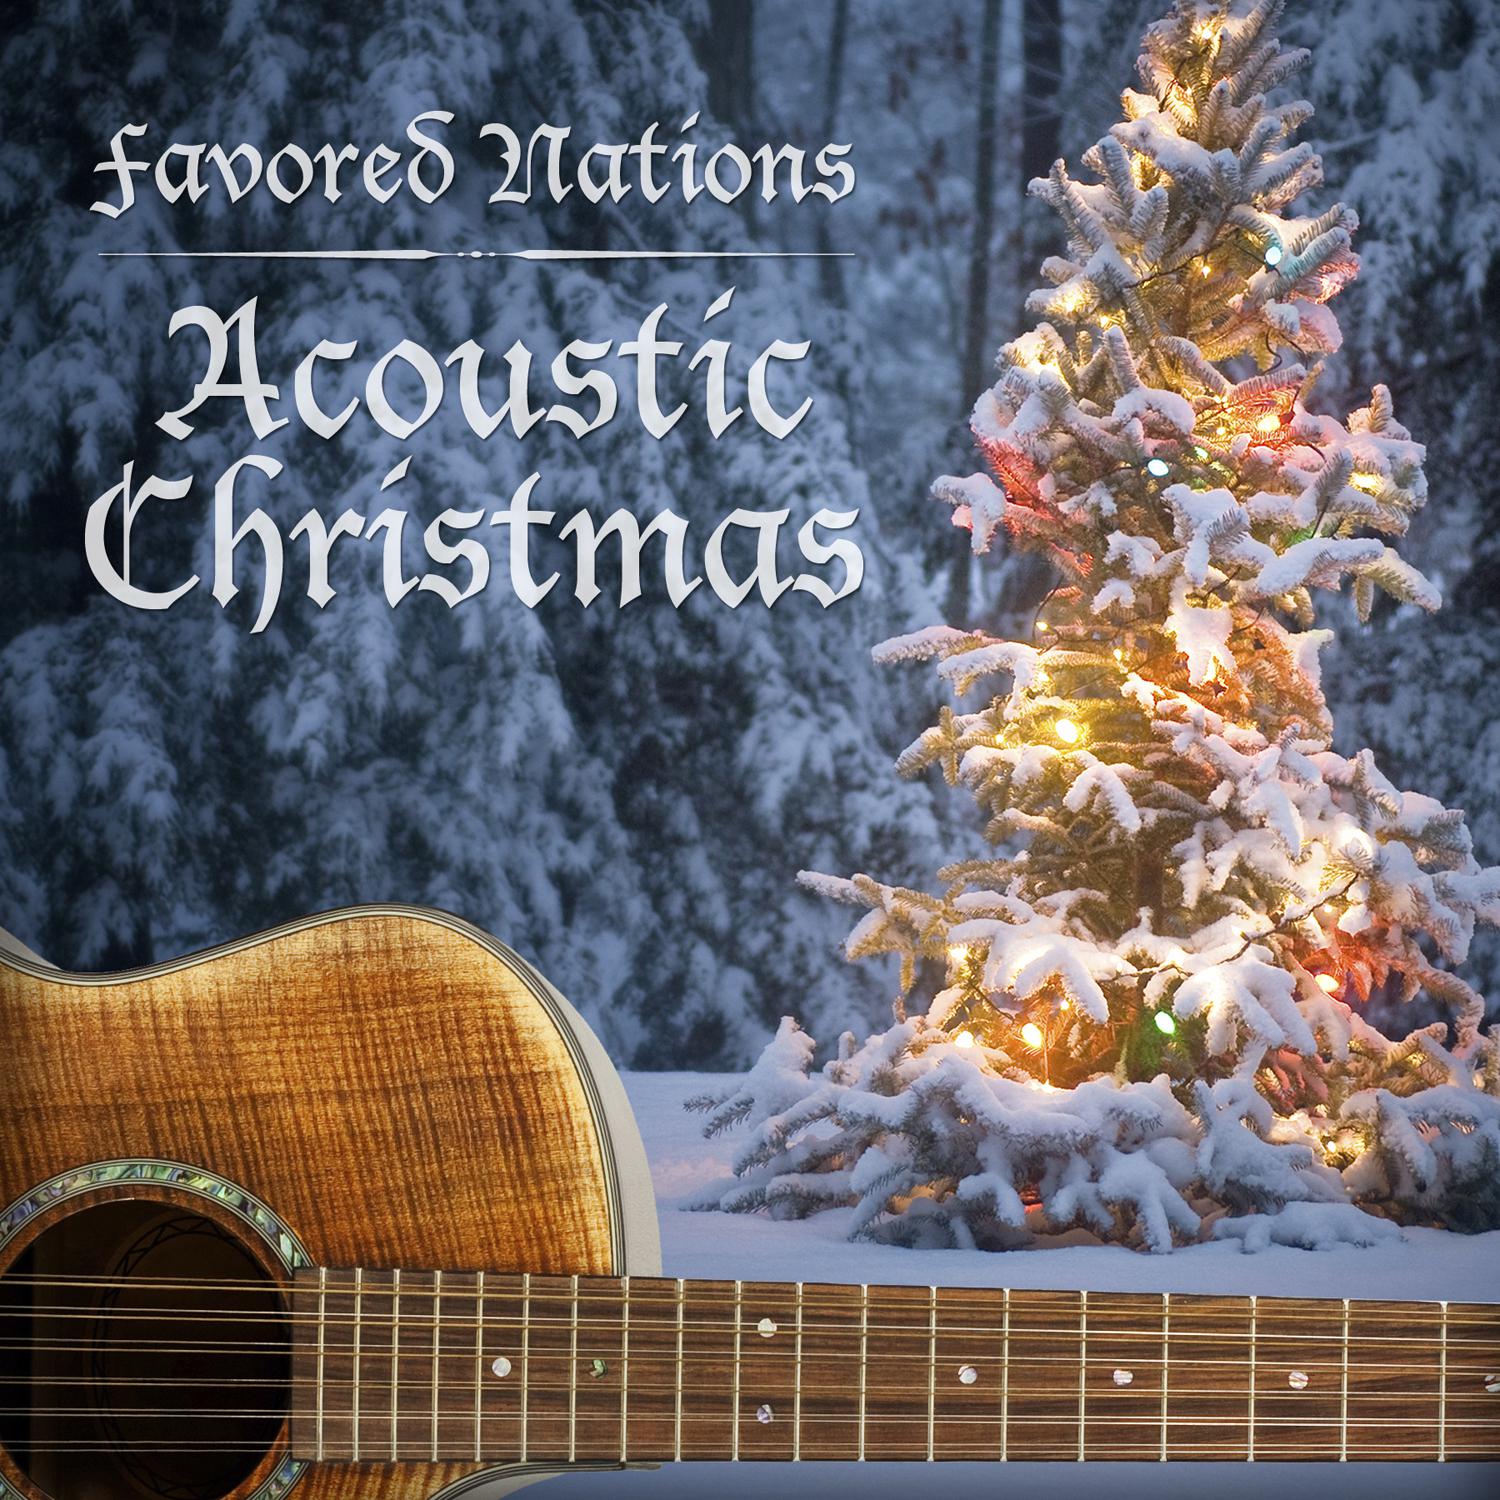 Favored Nations Acoustic Christmas